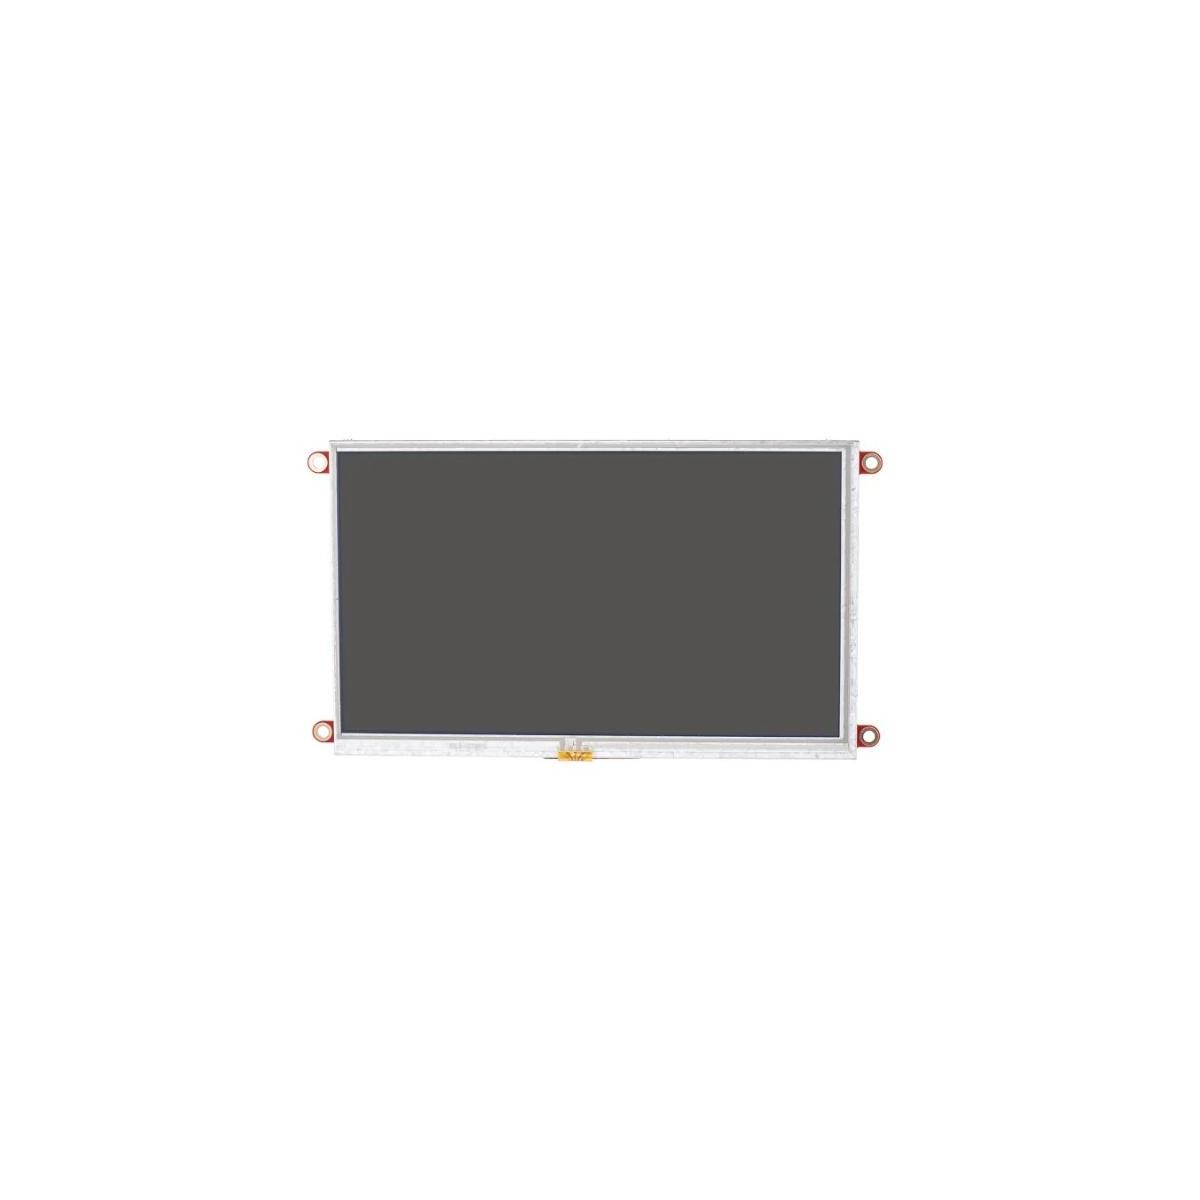 Display SYSTEMS 841-7835 4D